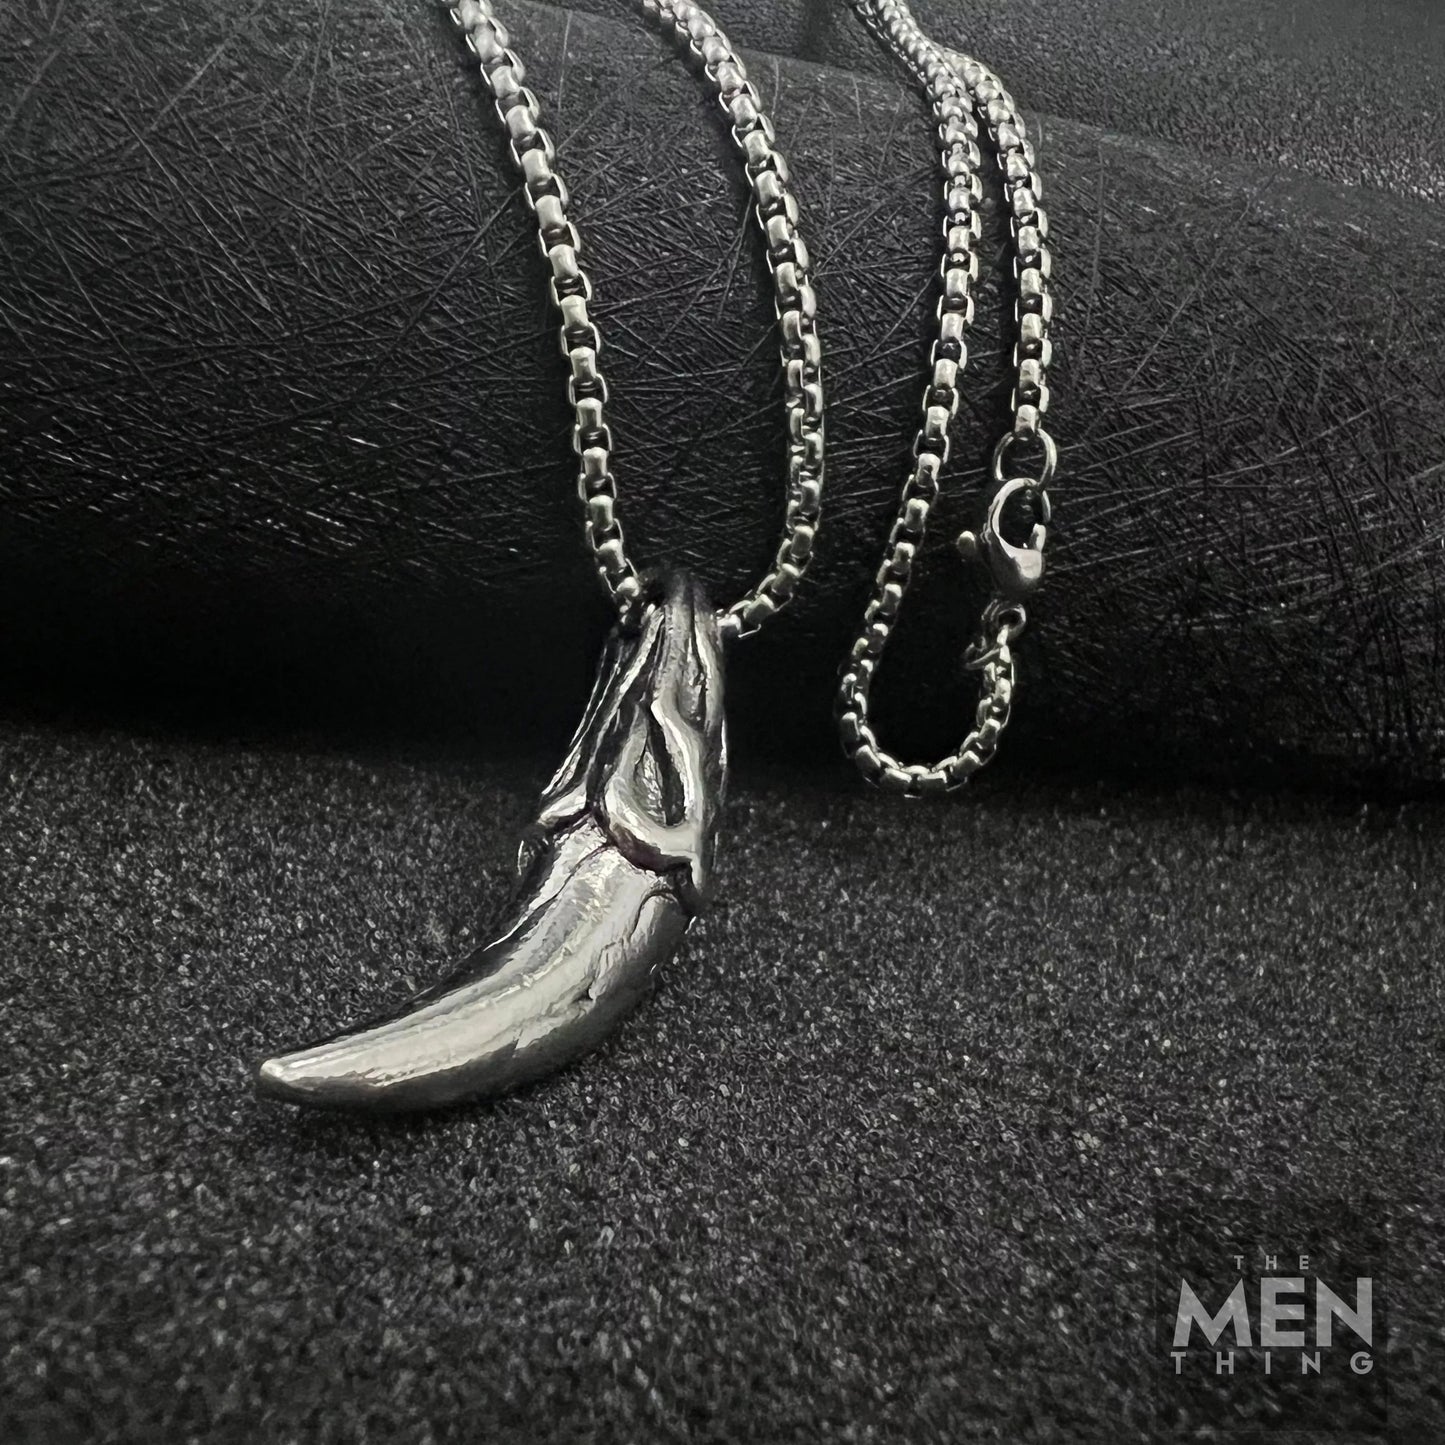 THE MEN THING Alloy Spike Pendant with Pure Stainless Steel 24inch Chain for Men, American trending Style - Round Box Chain & Pendant for Men & Boy